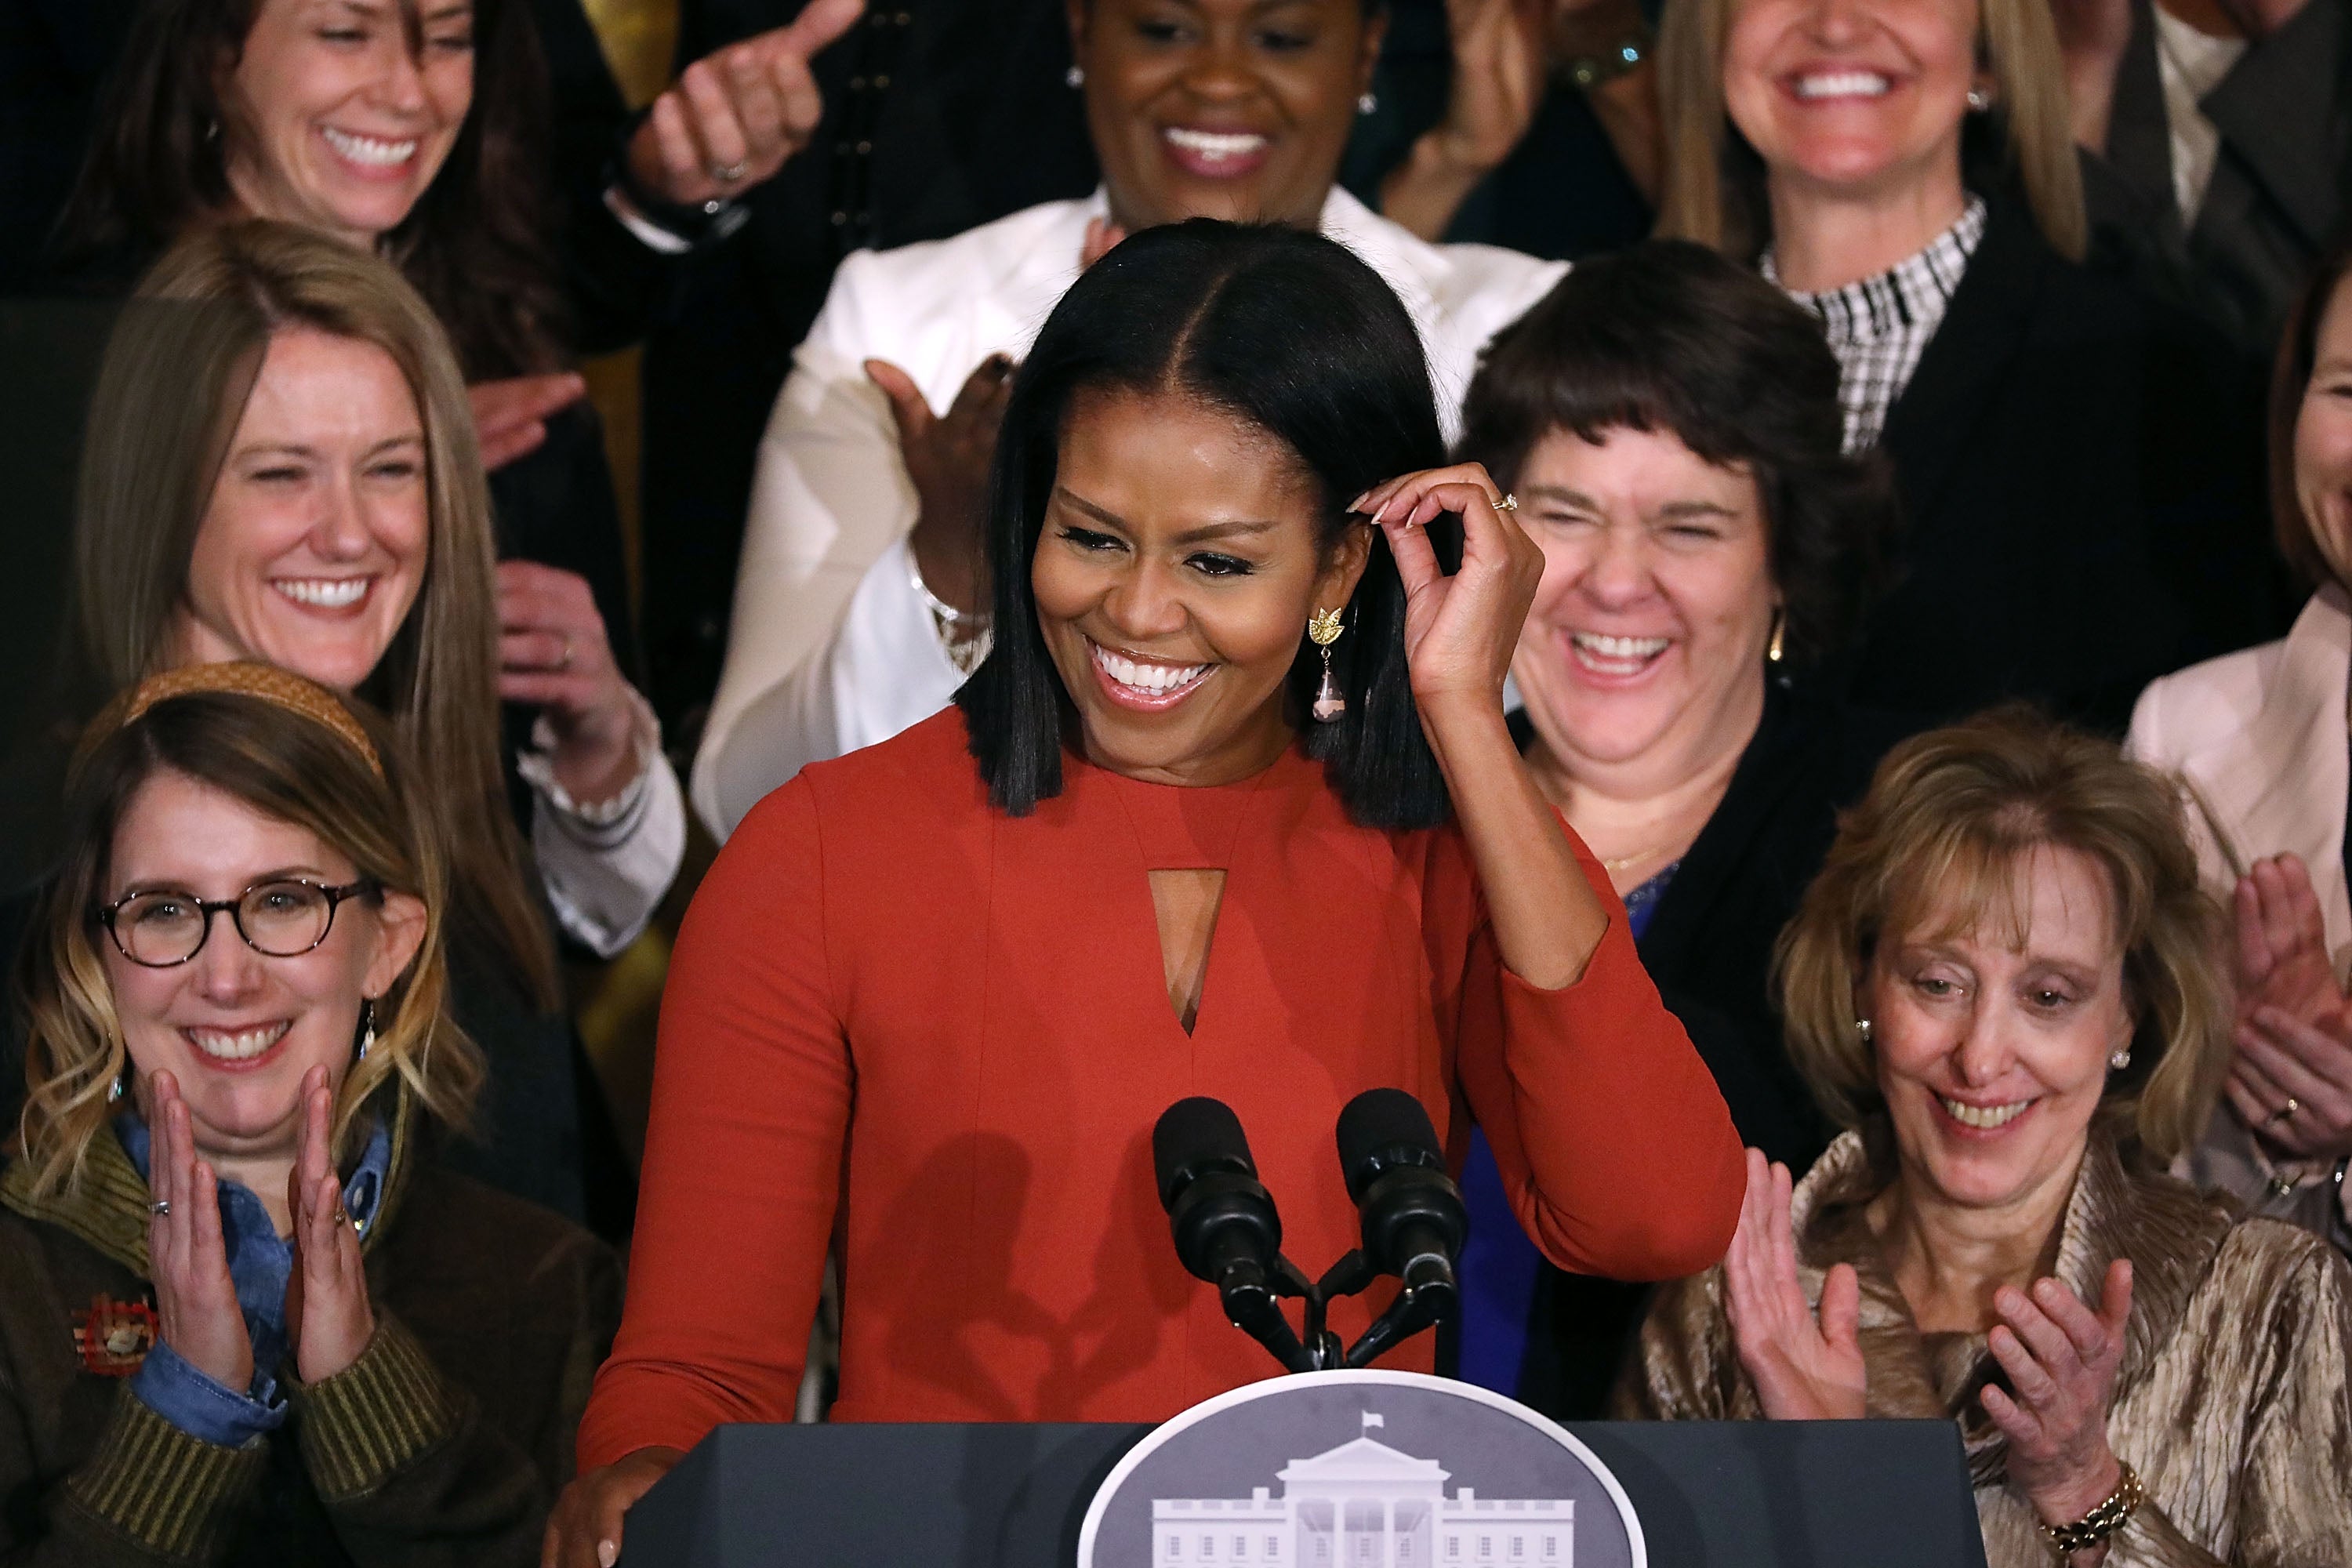 Revisit Michelle Obama's Letter To Black Women: 'We Are Strong, Our Opinions Matter'
